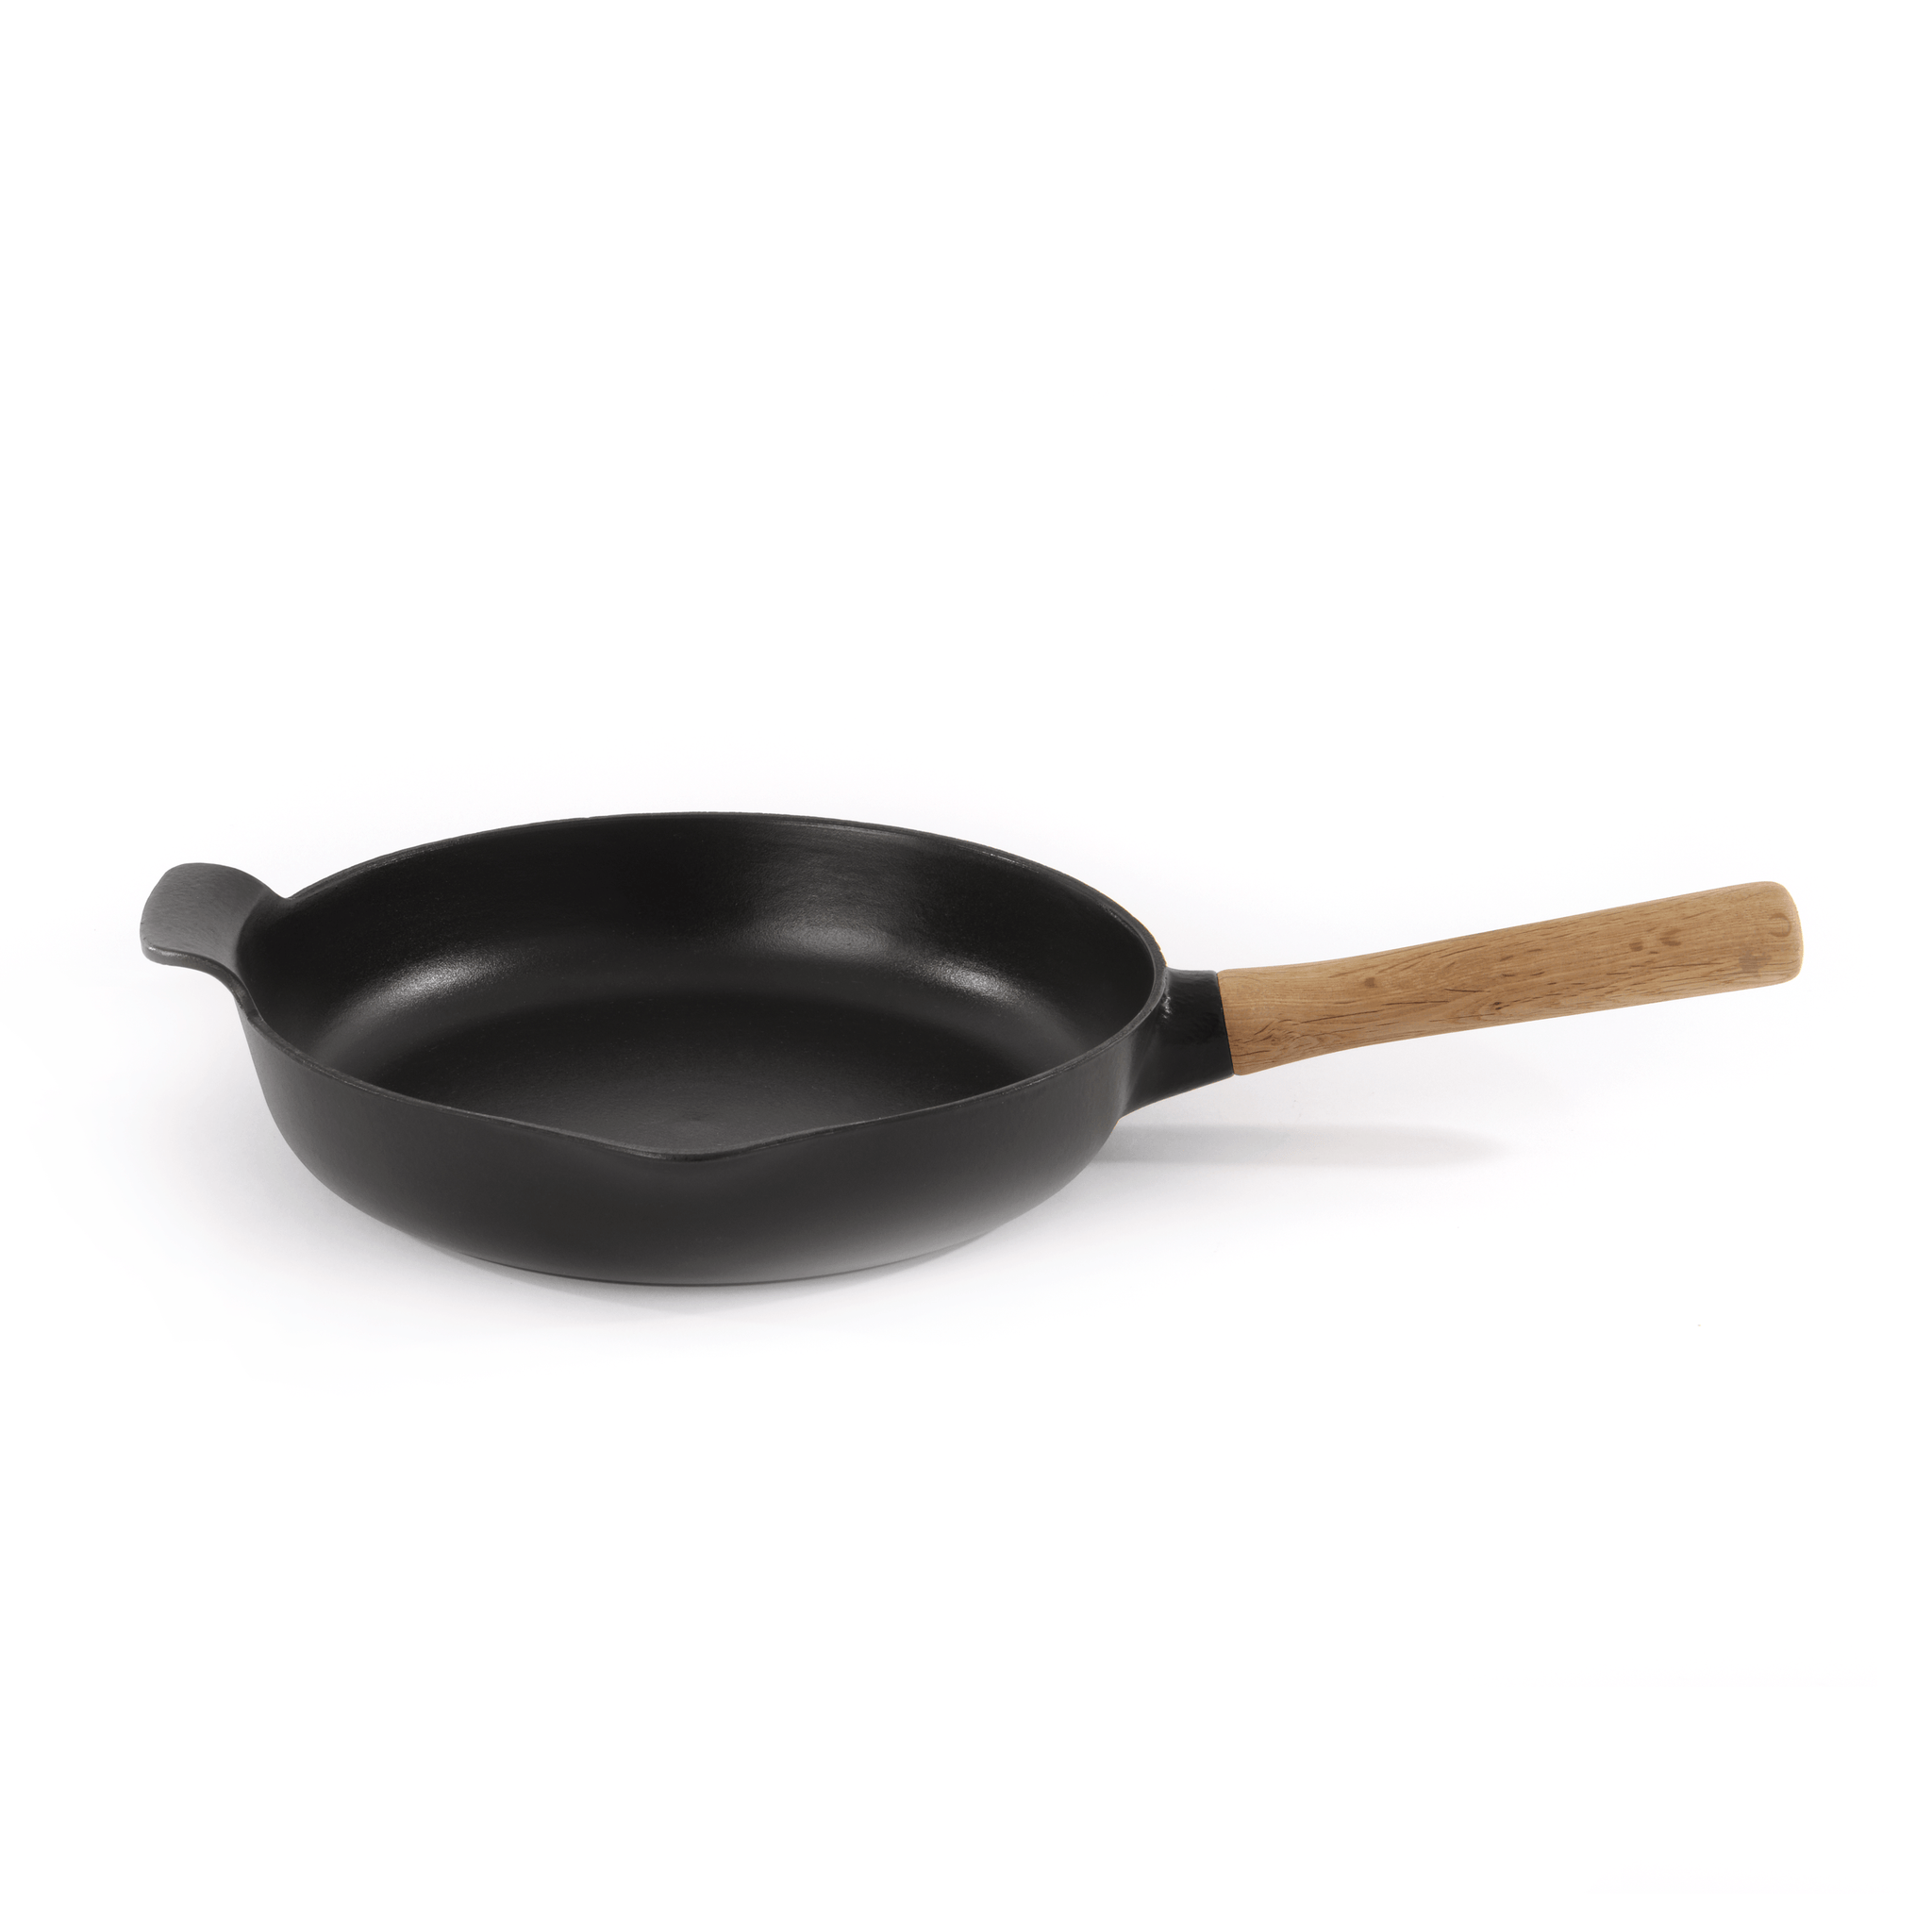 BergHOFF - Ron Black Frying Pan with Wooden Handle 26cm - Cast Iron - 440001579